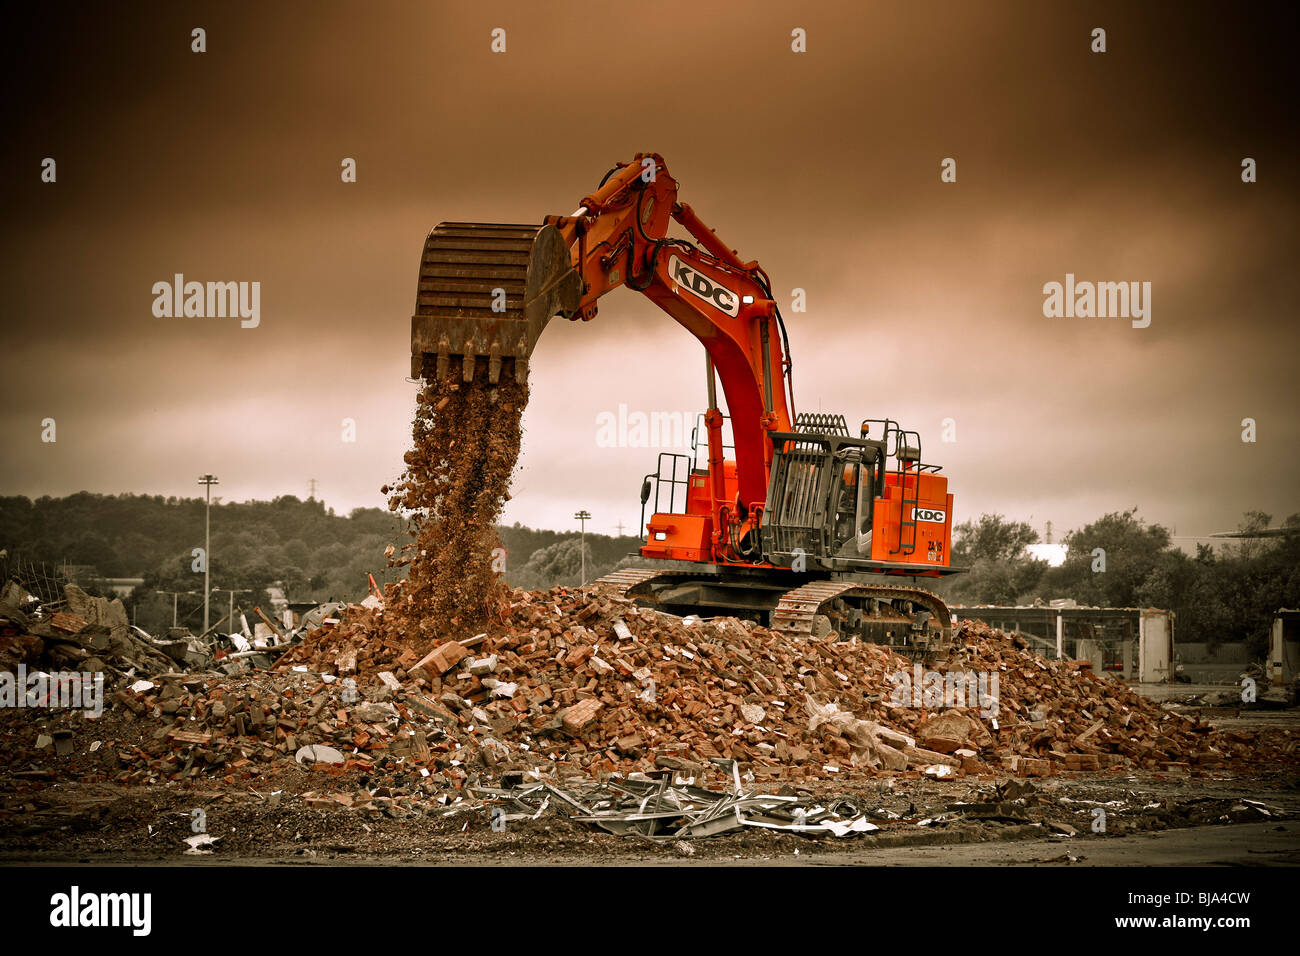 A digger working on the demolition of industrial an site. Stock Photo